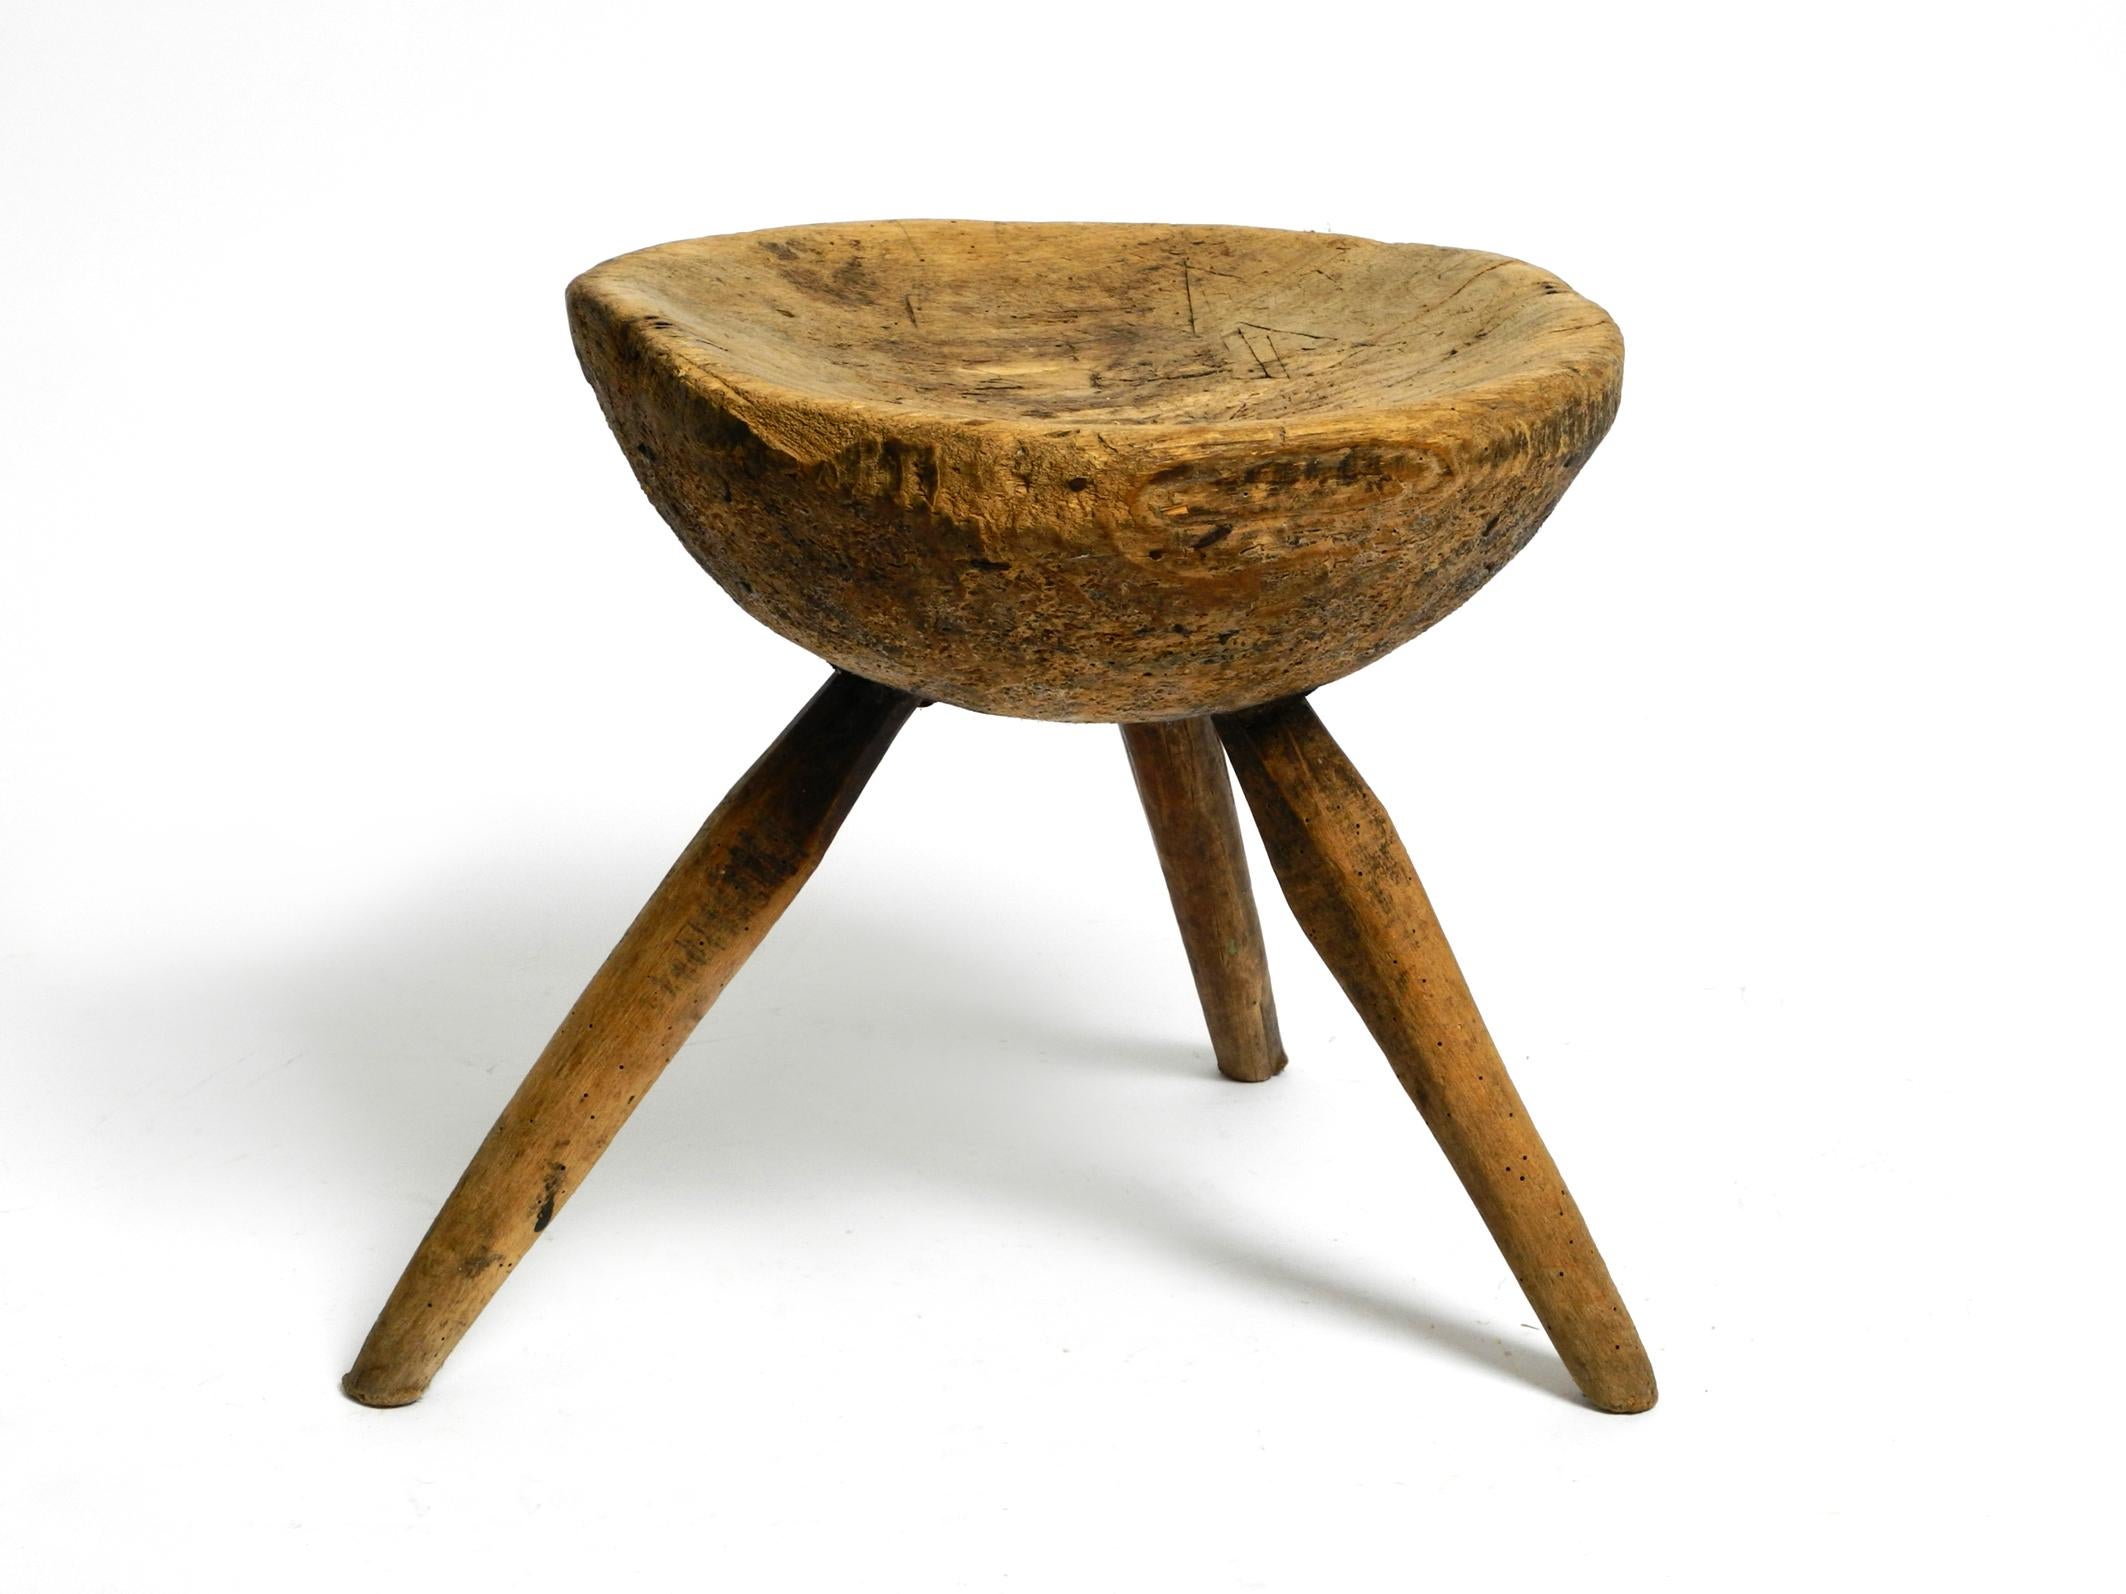 Beautiful original hand carved three legged stool or milking stool made from solid wood.
Made in Germany around 1900. Beautiful patina.
Very robust and heavily built, can also be used as a small side table.
Slightly curved seat with very old